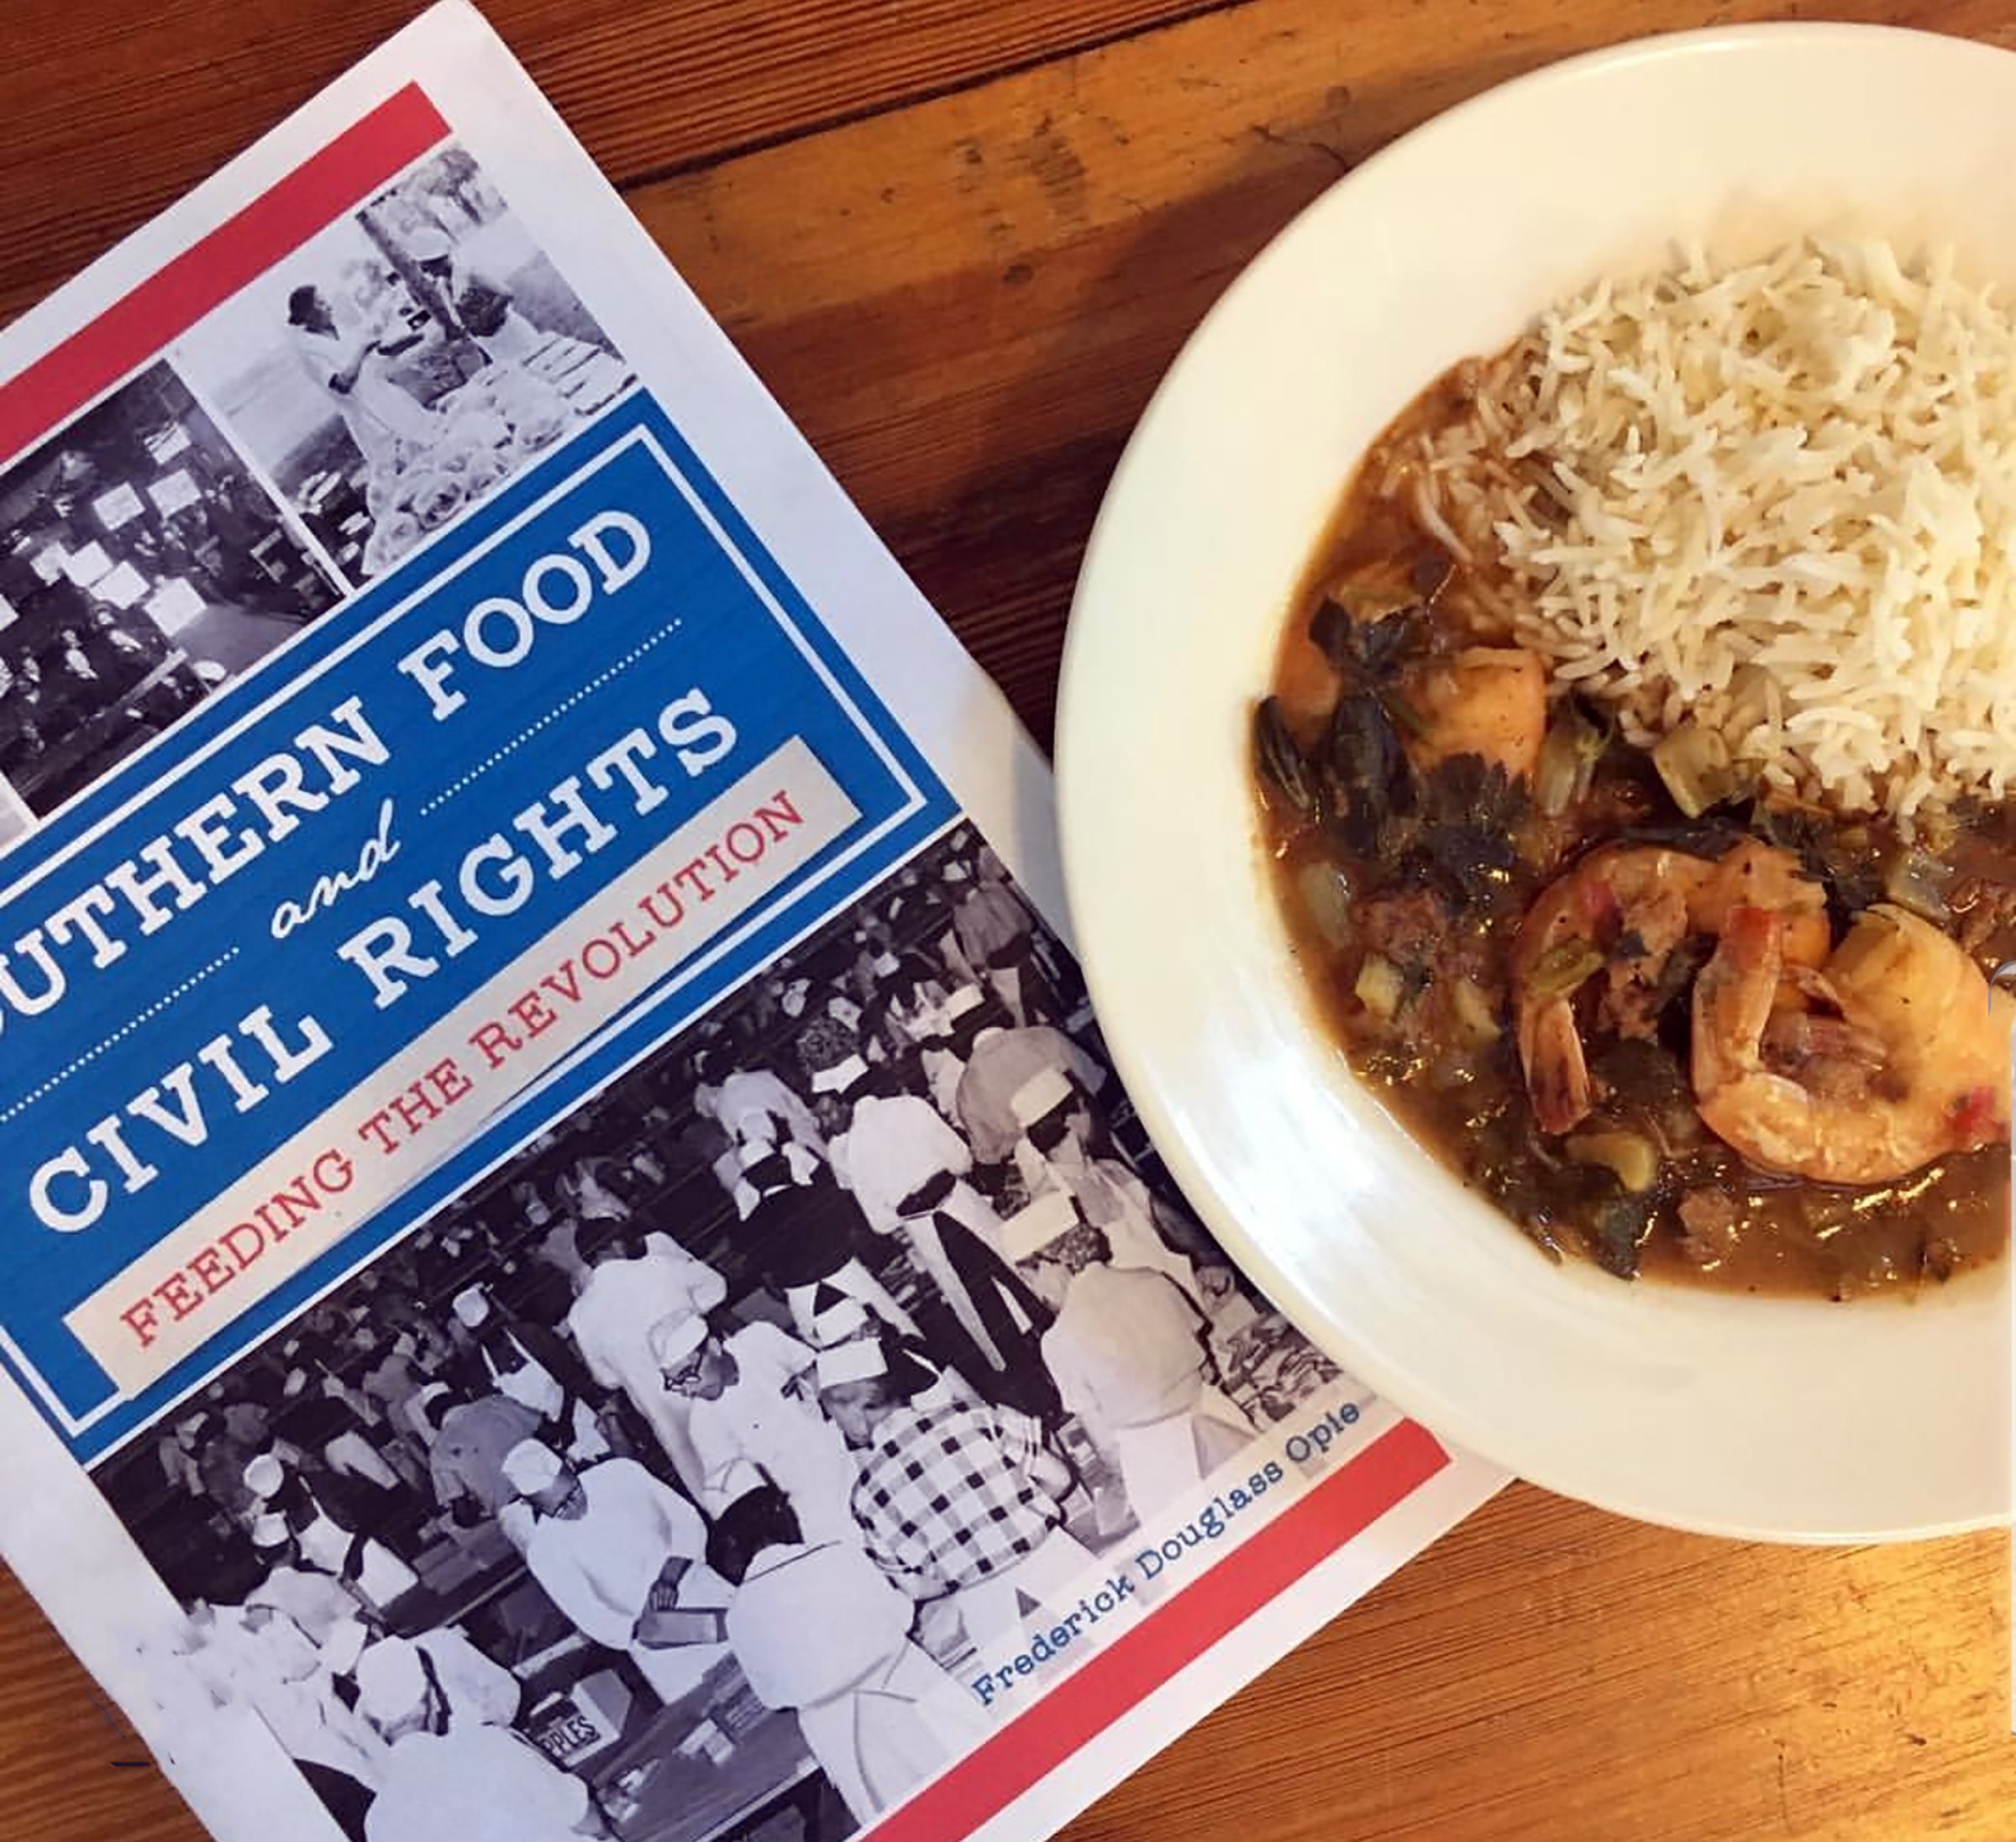 Southern Food and Civil Rights book curation.jpg